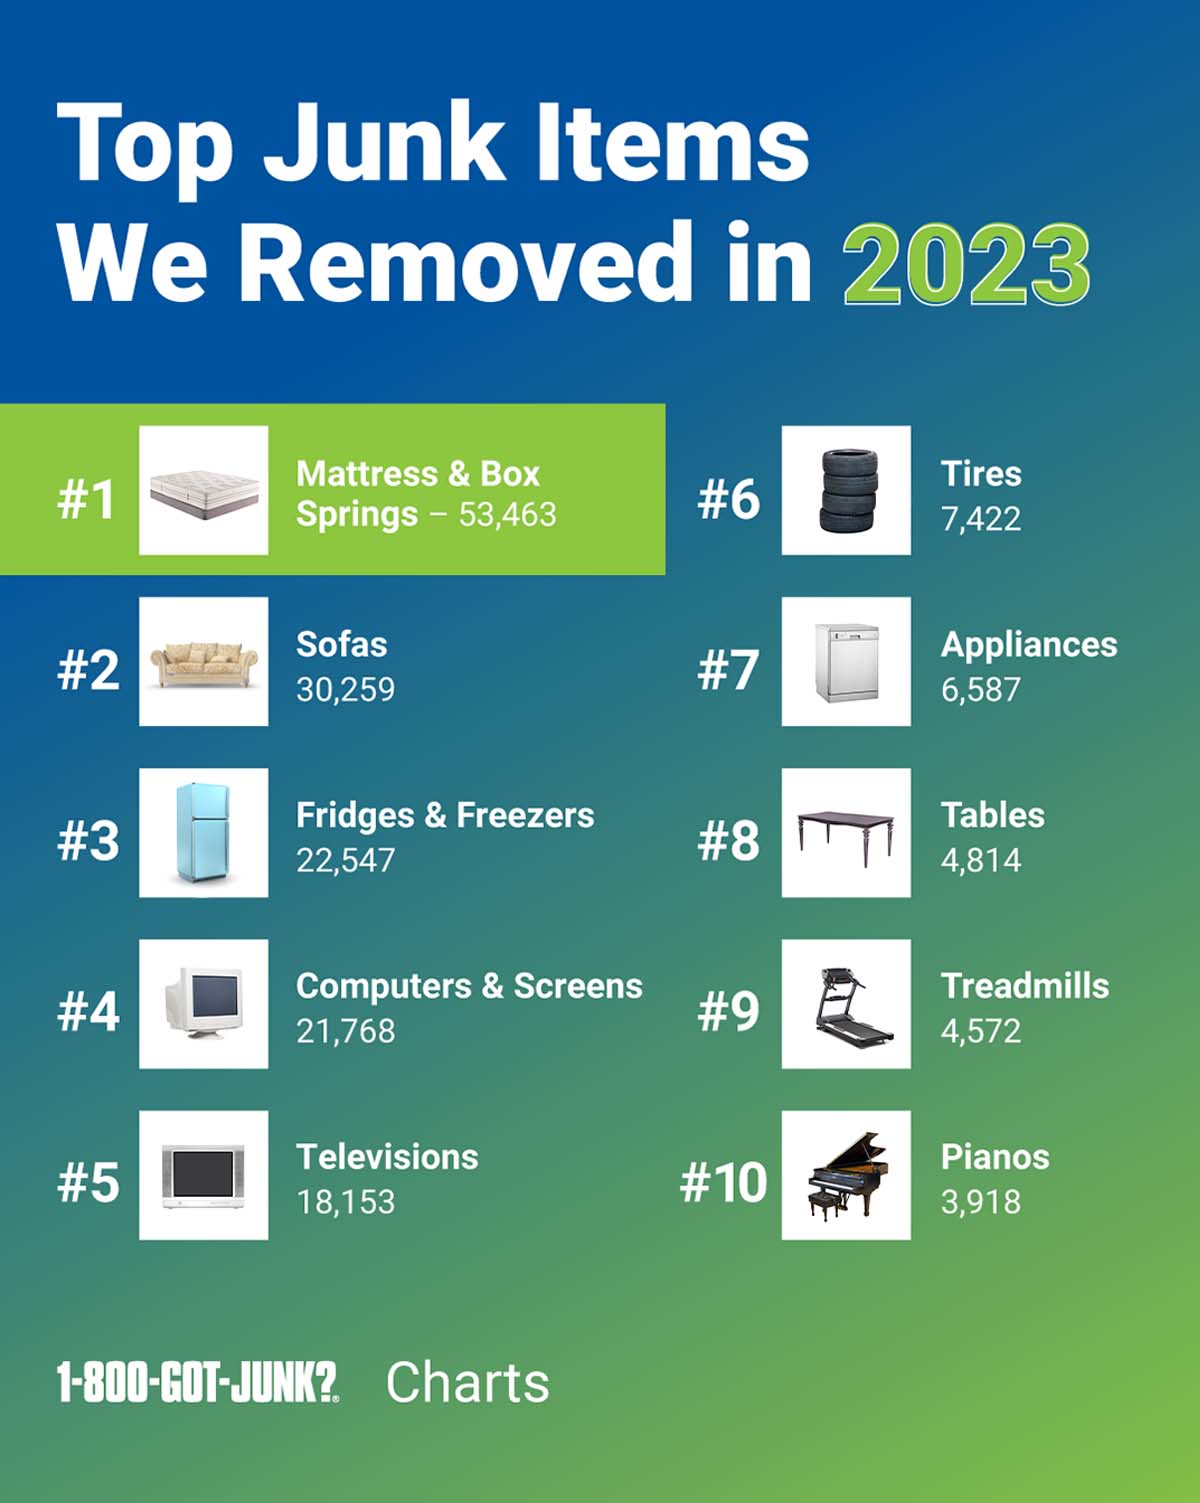 Top items removed in 2023 ranking